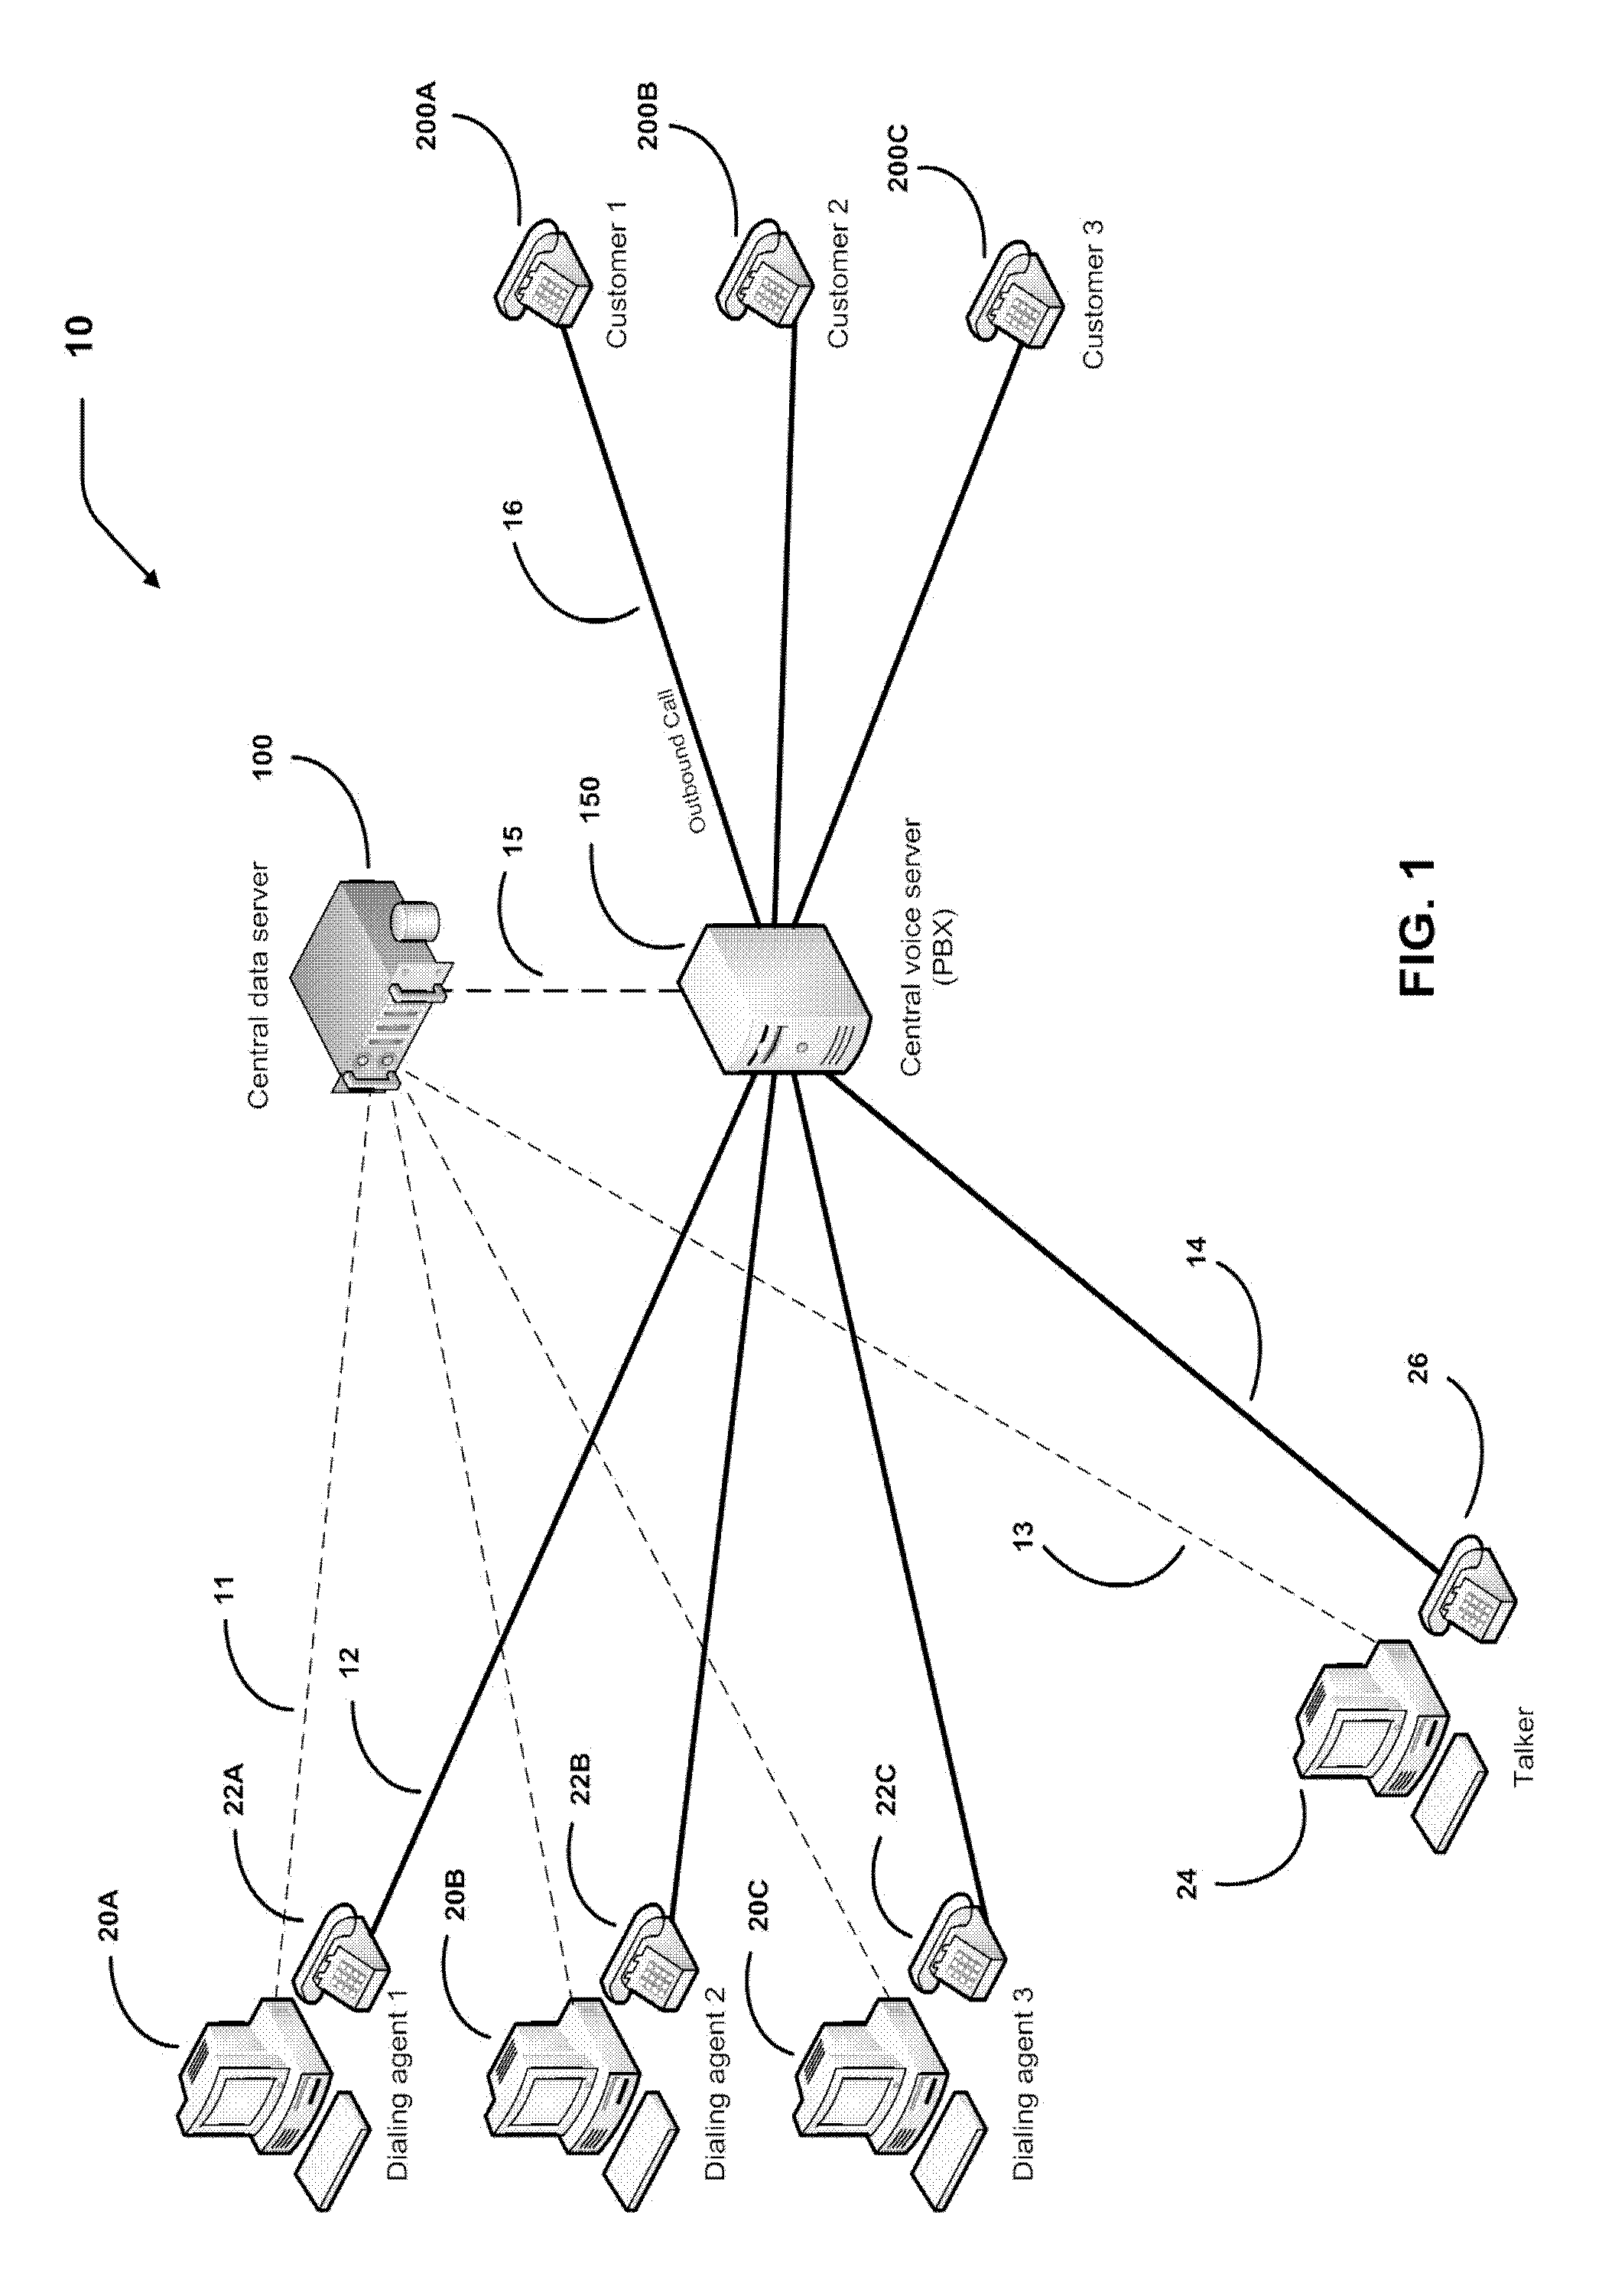 System and method for providing sales and marketing acceleration and effectiveness